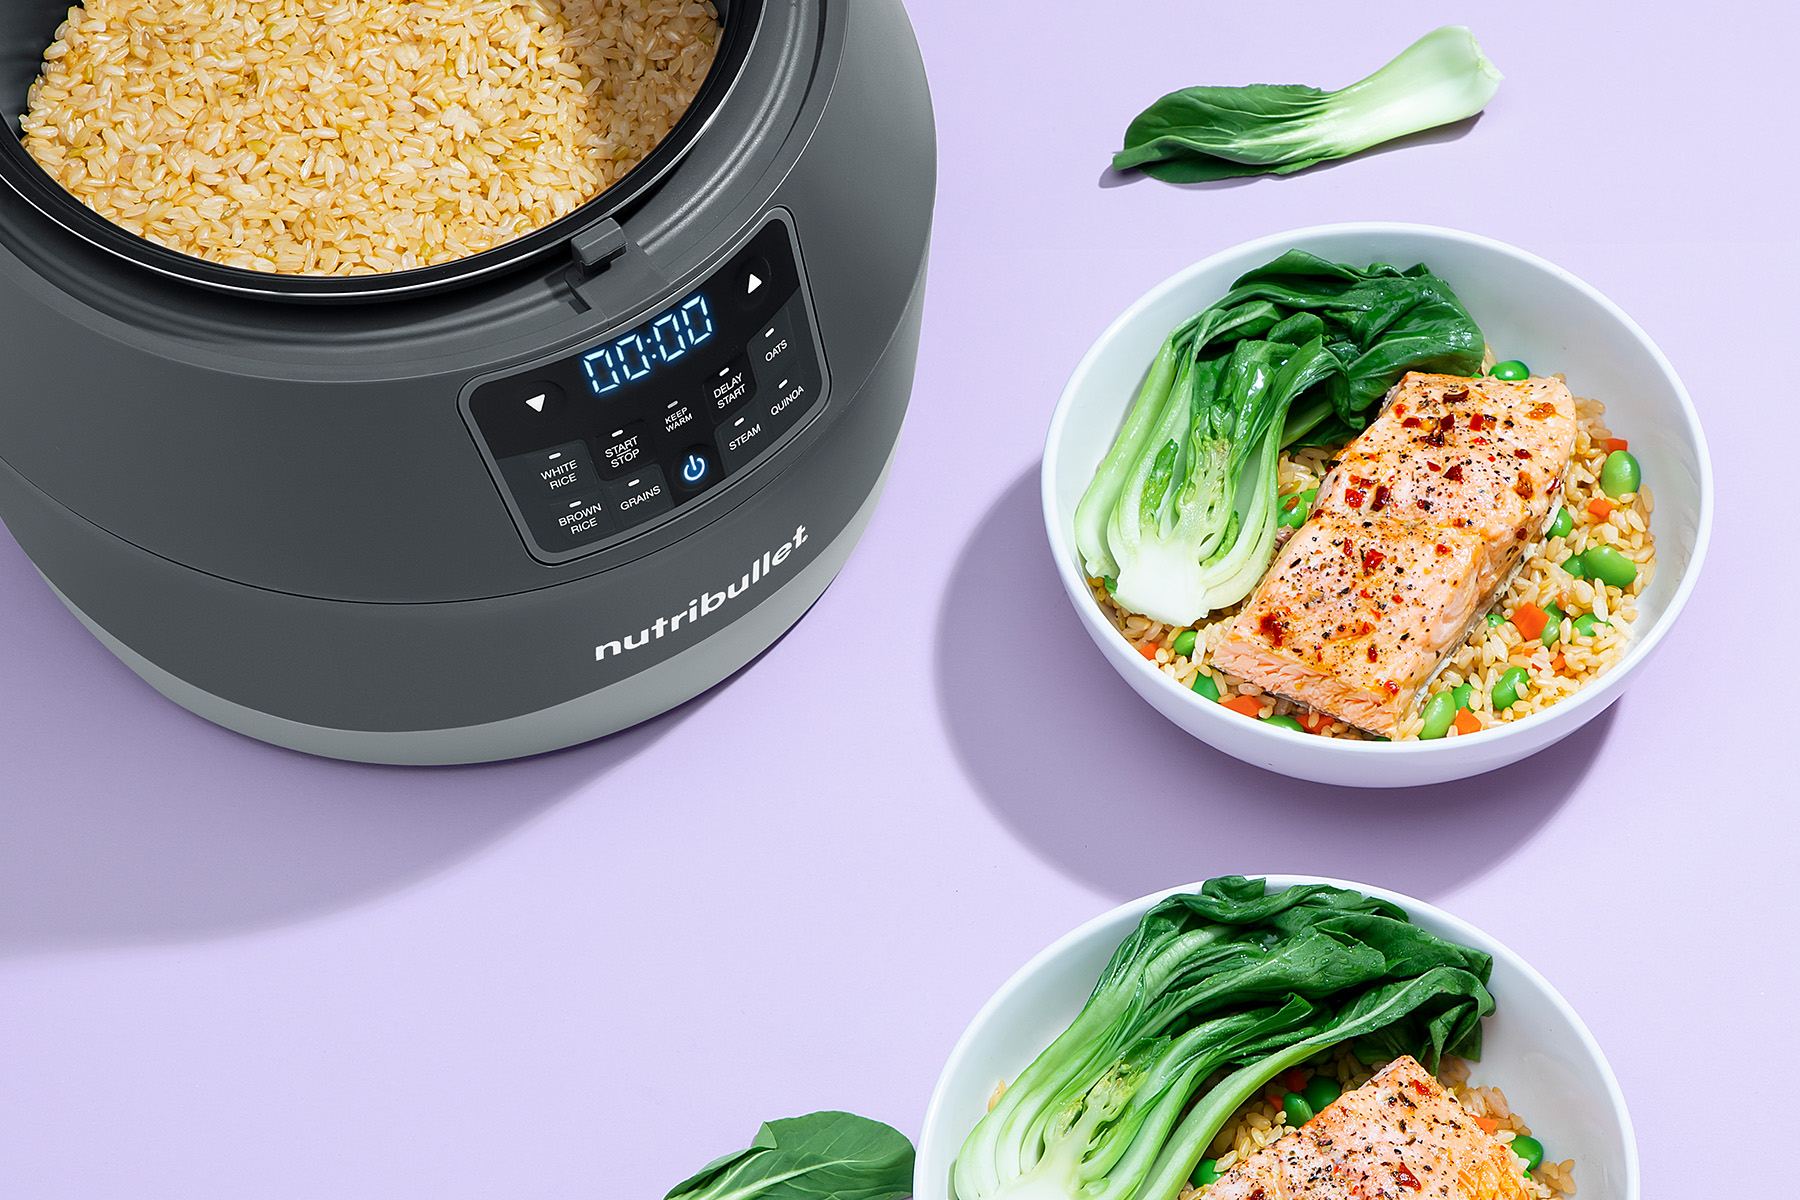 nutribullet grain cooker with salmon and bok choy brown rice bowl